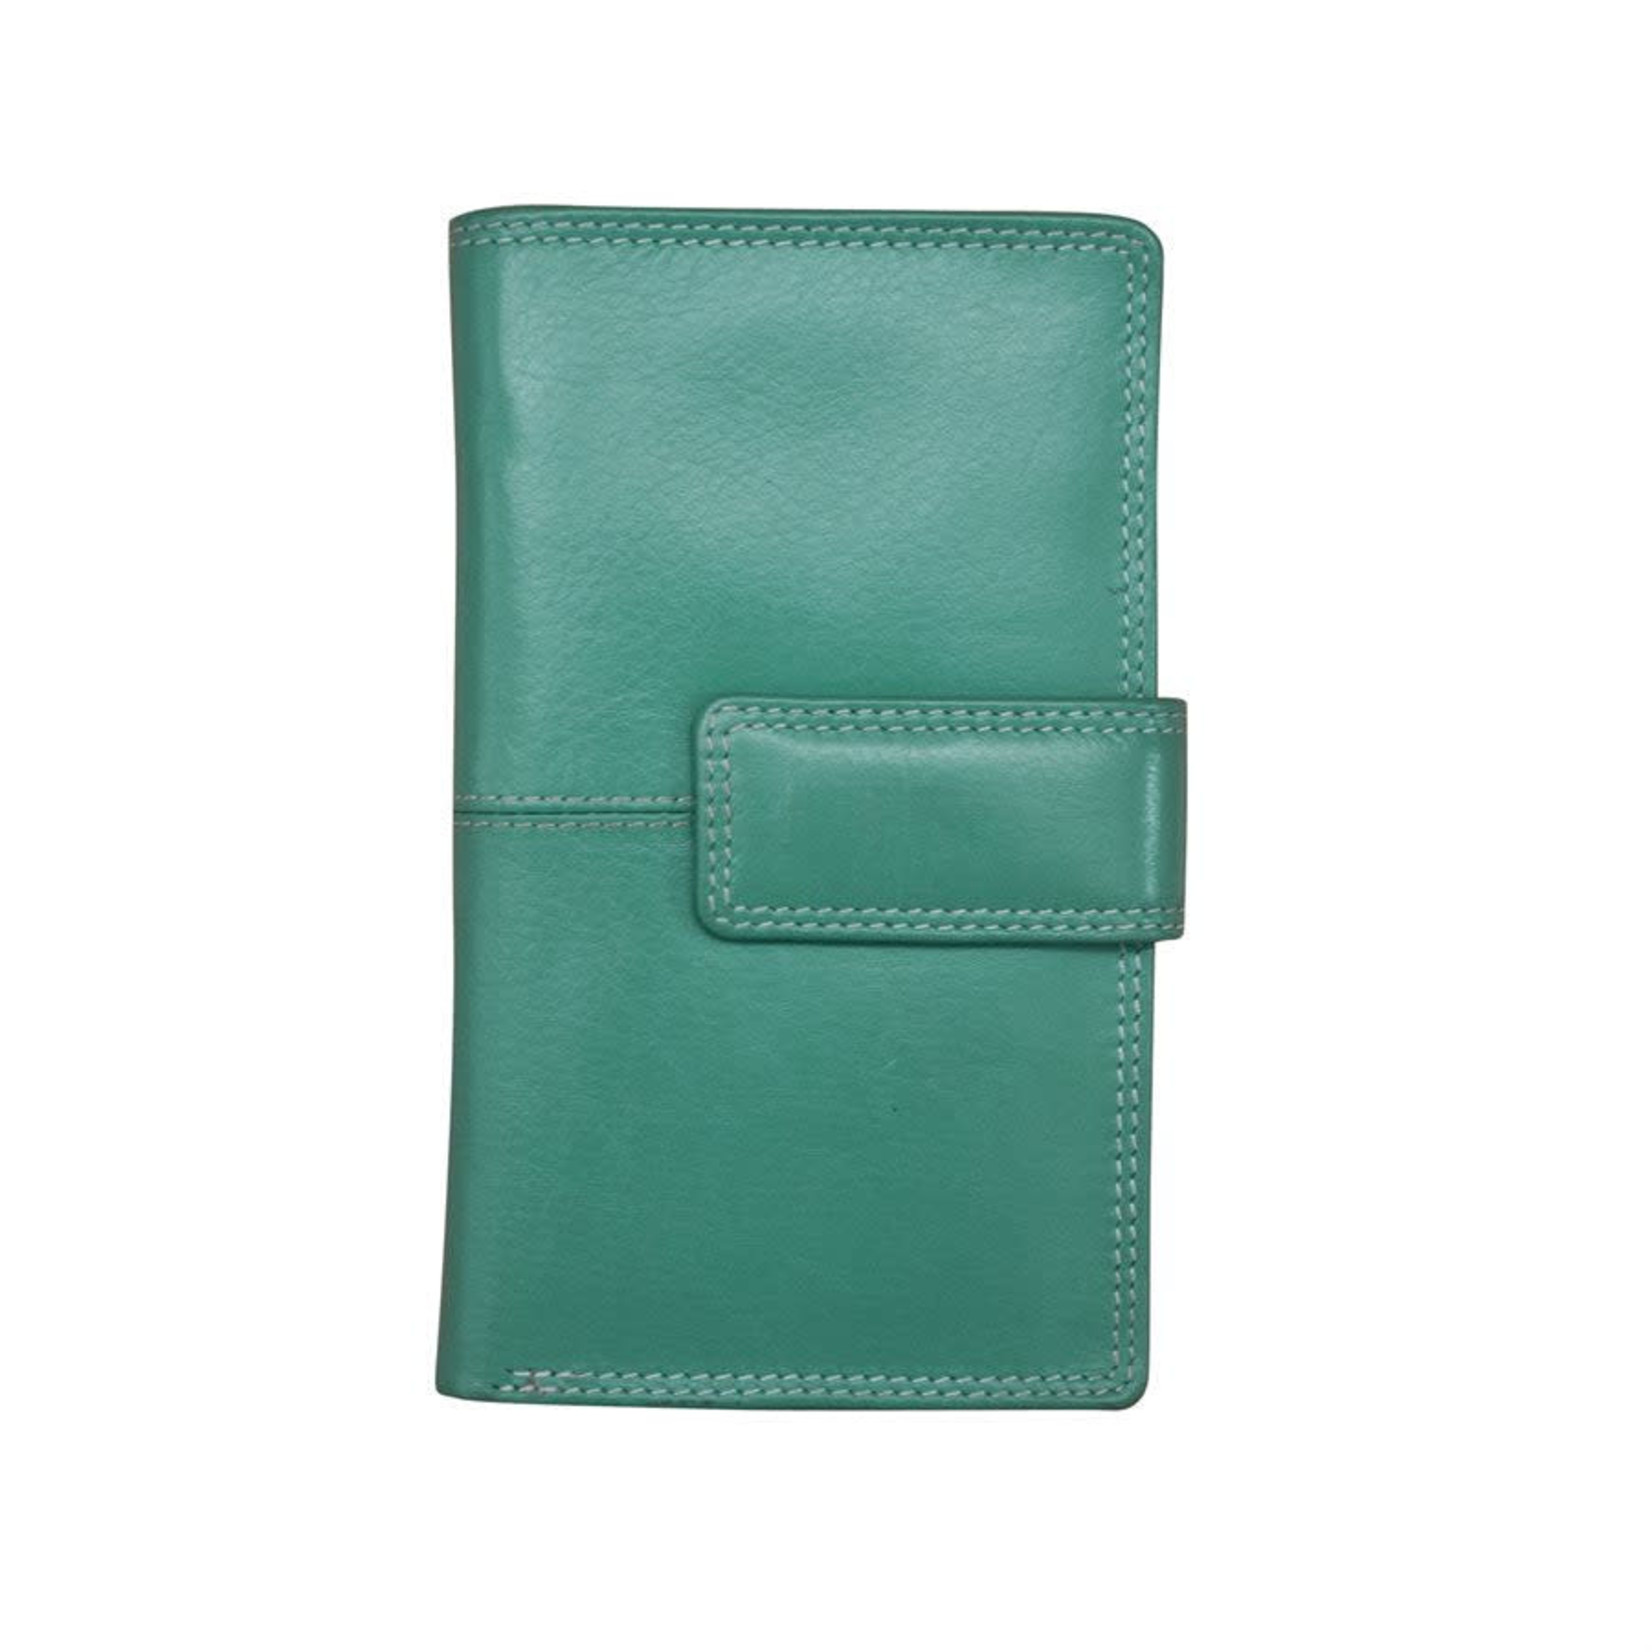 Leather Handbags and Accessories 7826 Turquoise - Midi Wallet